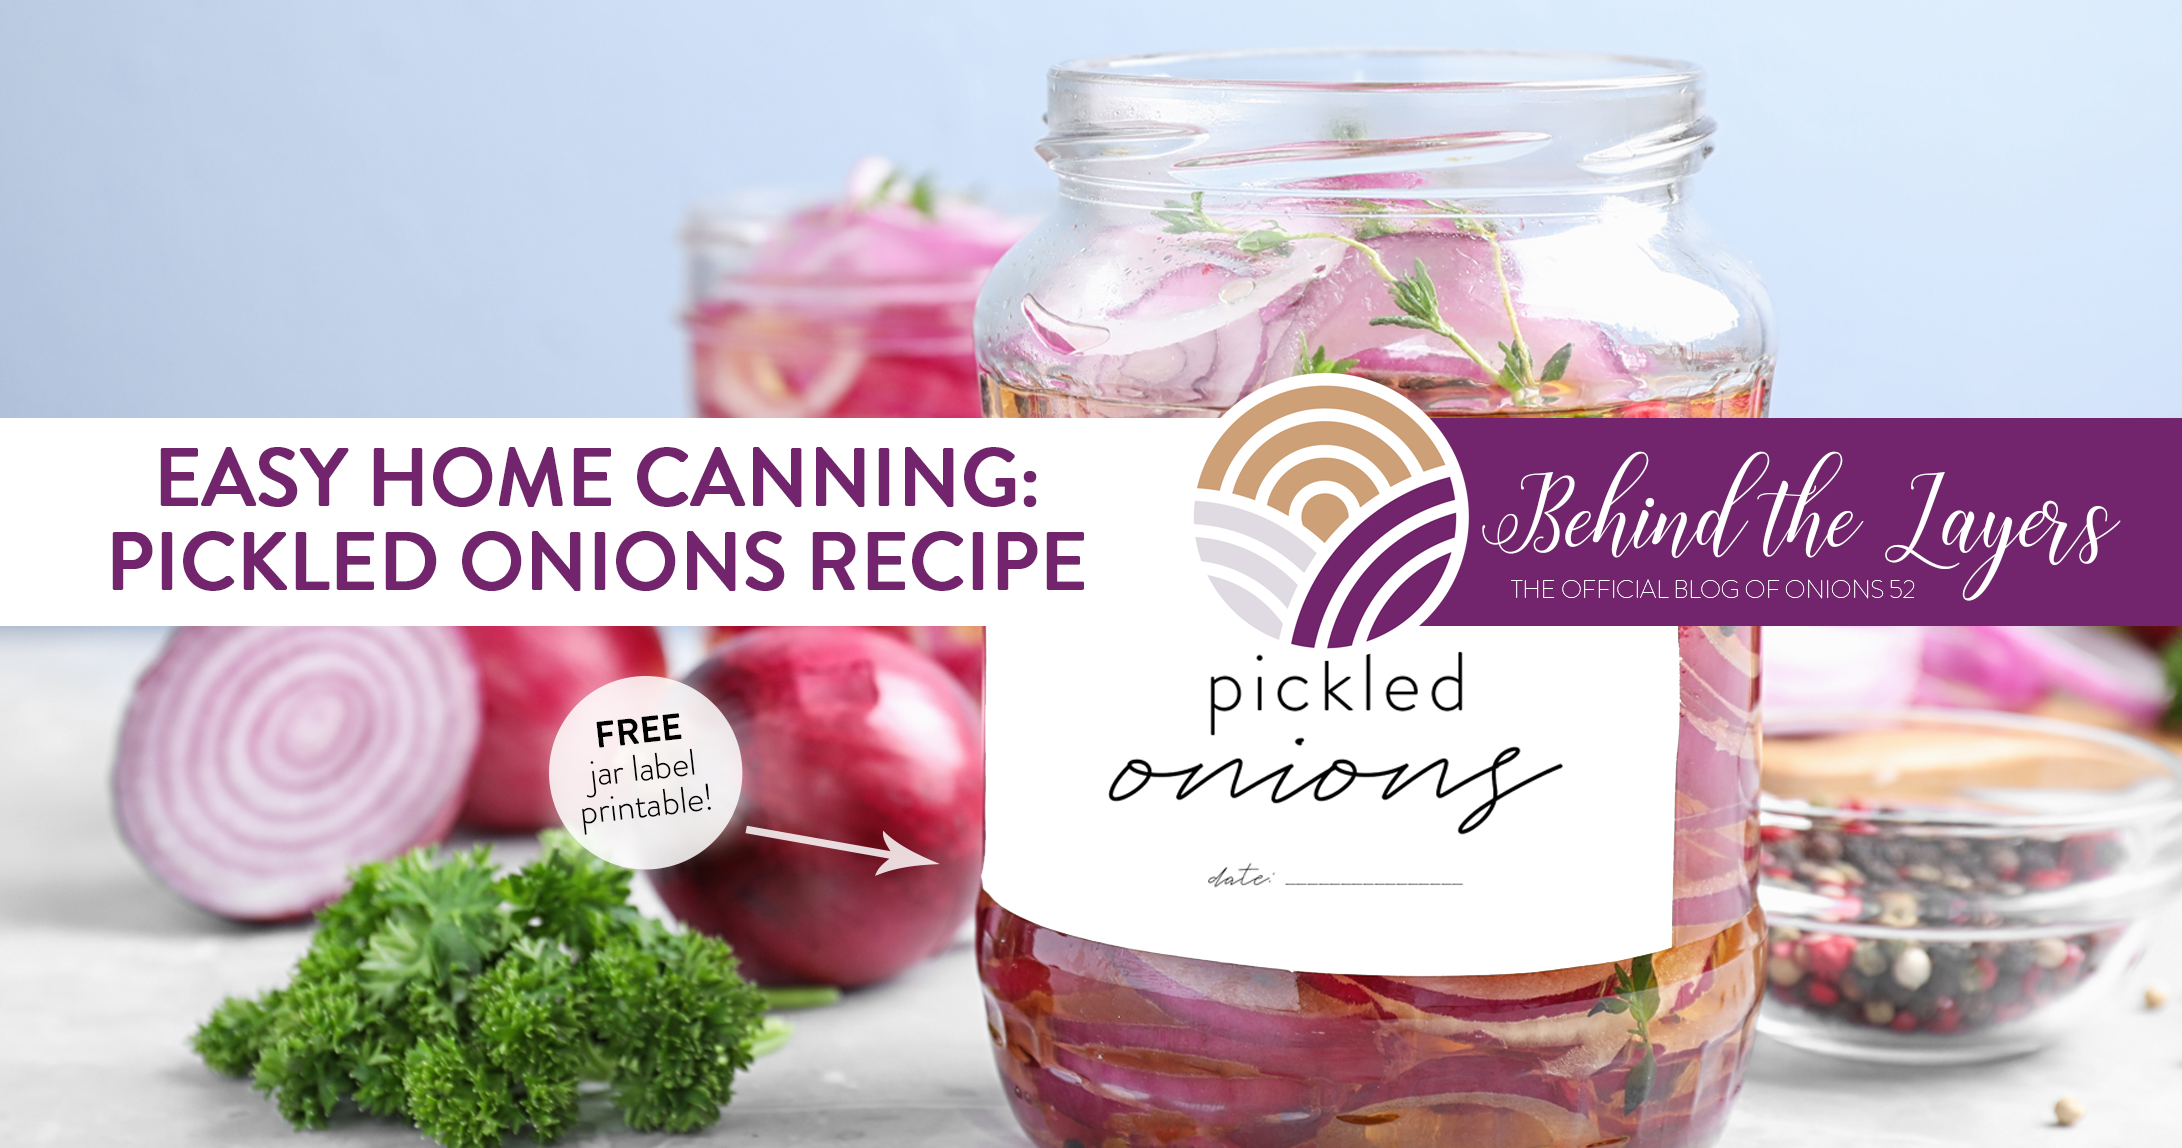 Easy Home Canning with Onions 52: Pickled Onions Recipe